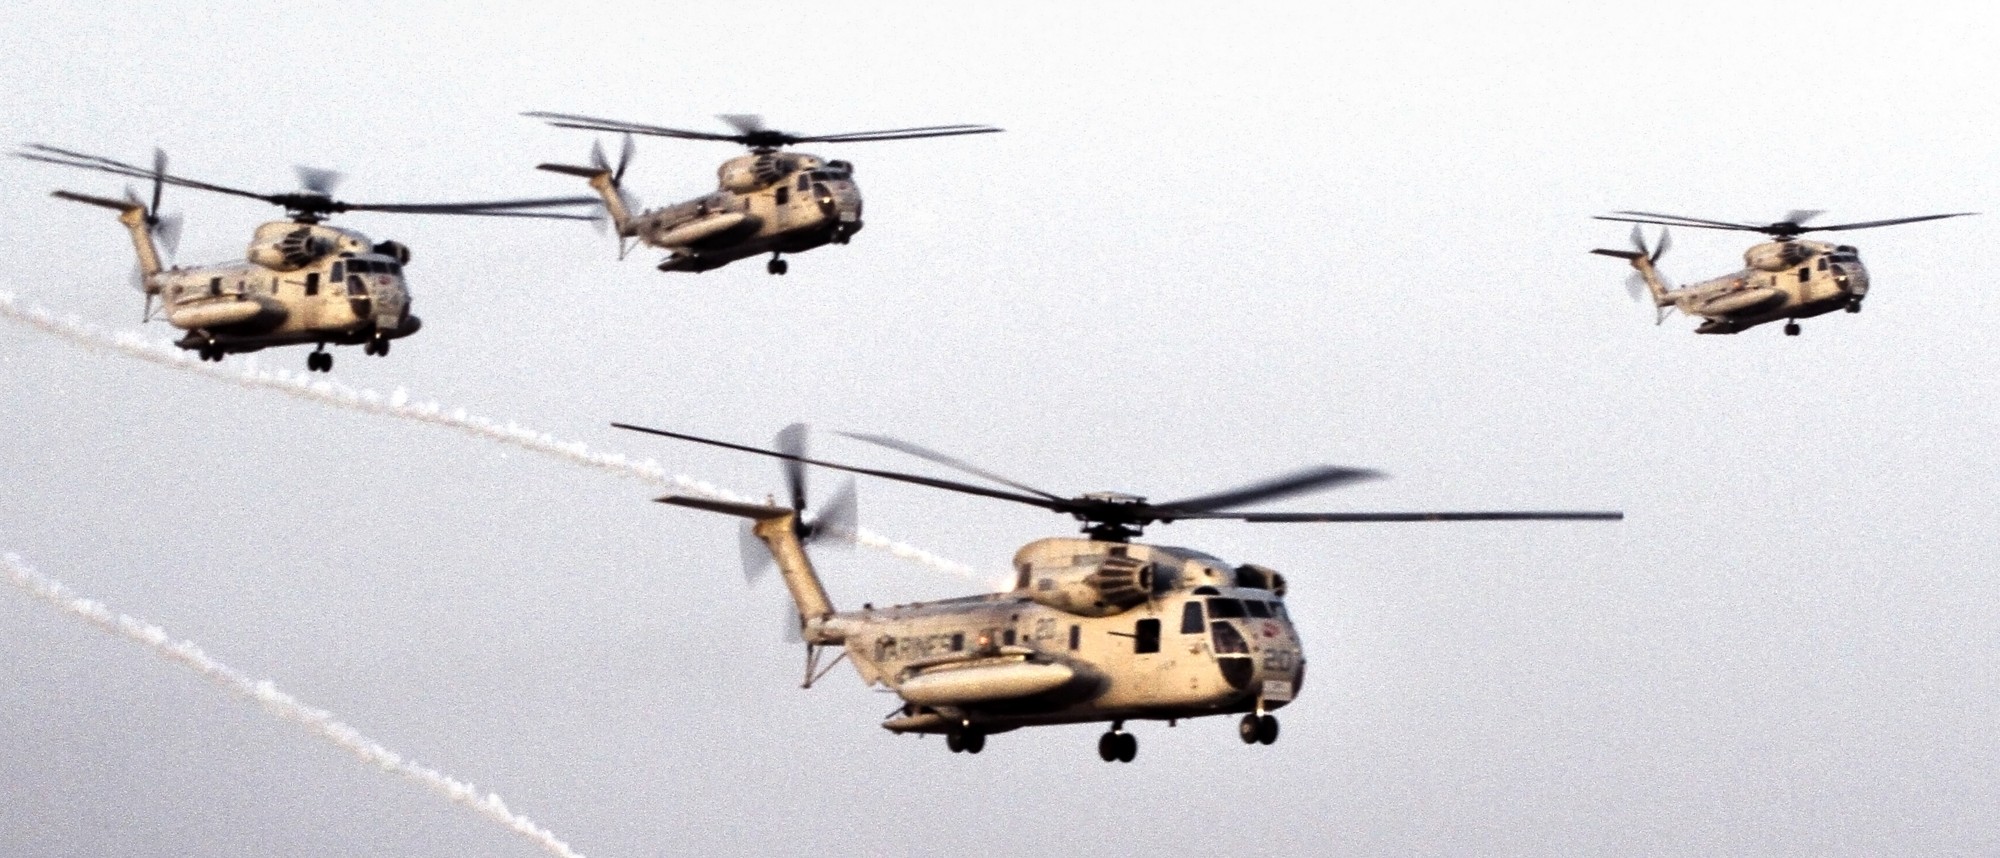 hmh-362 ugly angels marine heavy helicopter squadron usmc sikorsky ch-53d sea stallion 05